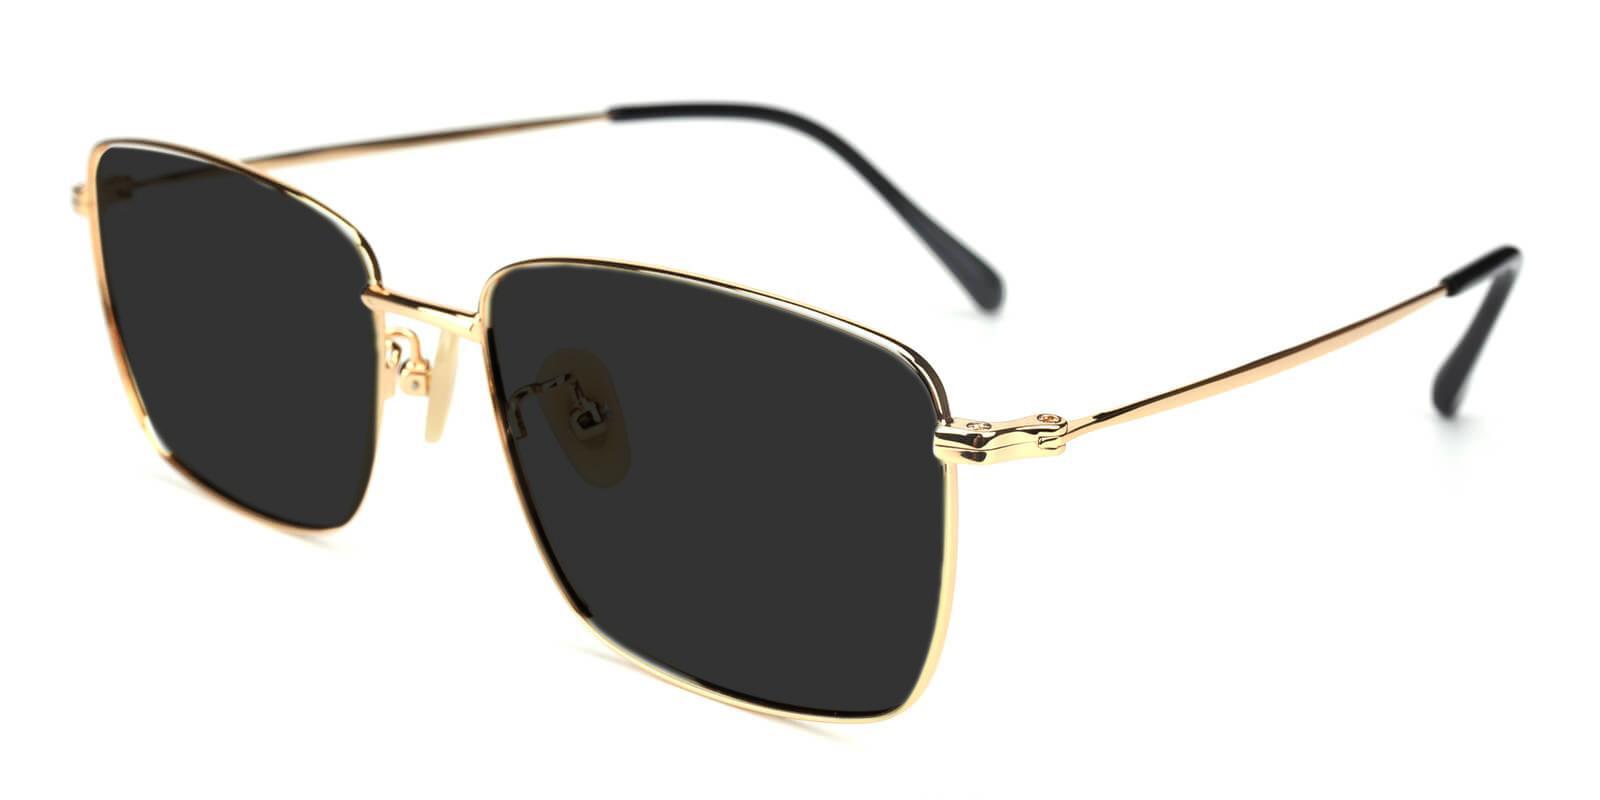 Synapse Gold Titanium Lightweight , NosePads , Sunglasses Frames from ABBE Glasses